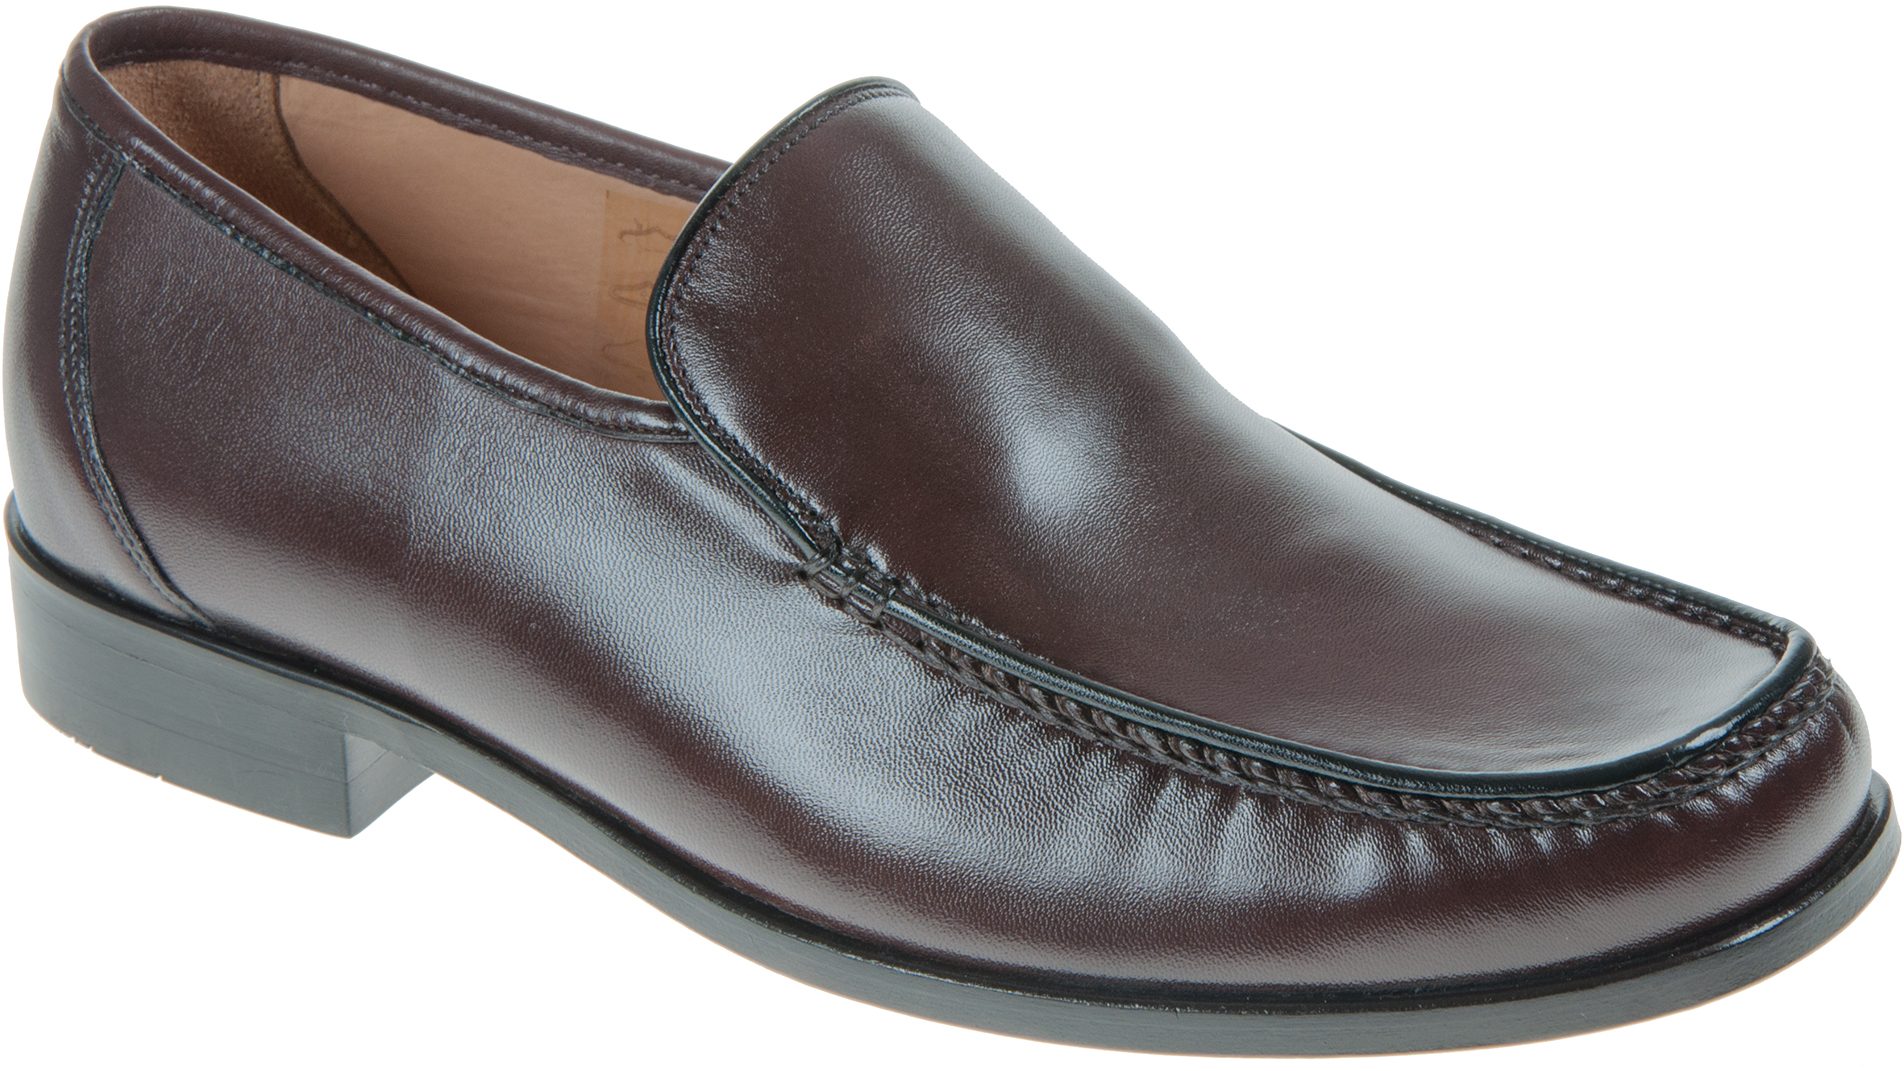 Loake Siena Brown - Formal Shoes - Humphries Shoes